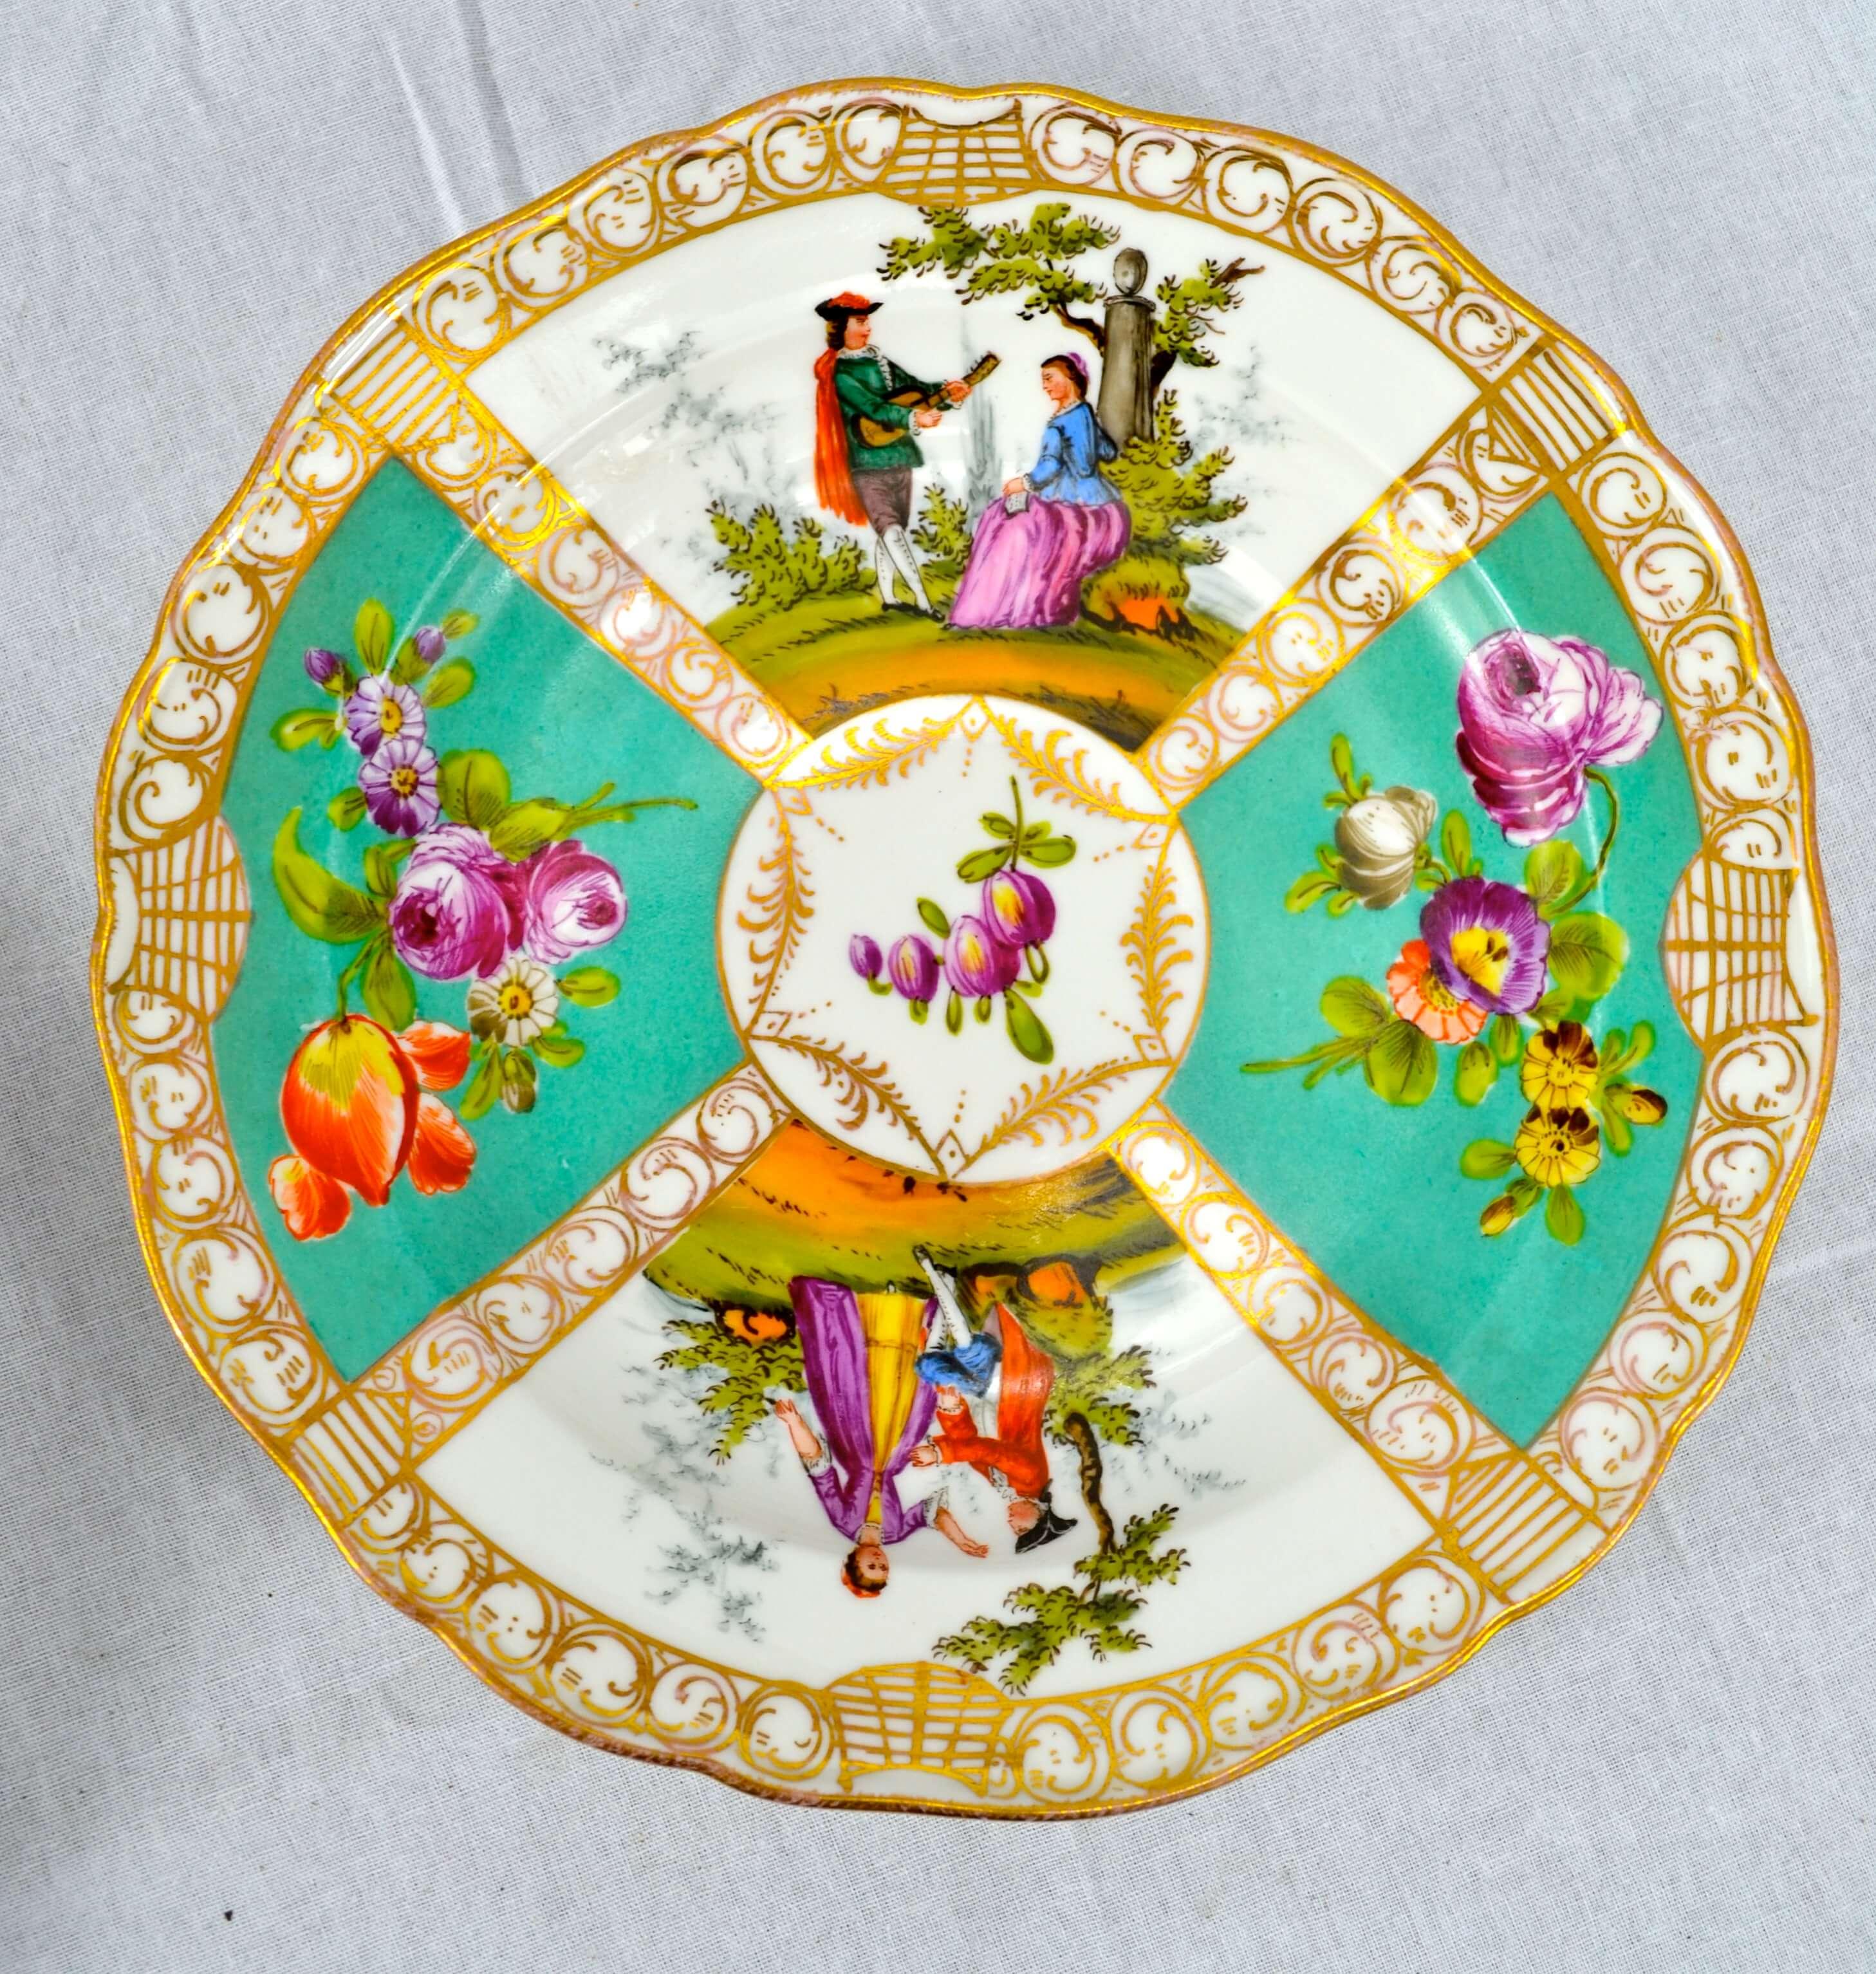 A set of six Meissen plates. Each plate has a different colour palette and shows a different idyllic scene of a couple in a romantic landscape. The two other painted quadrants and the centre depict different types of flowers, all in a gilded border.